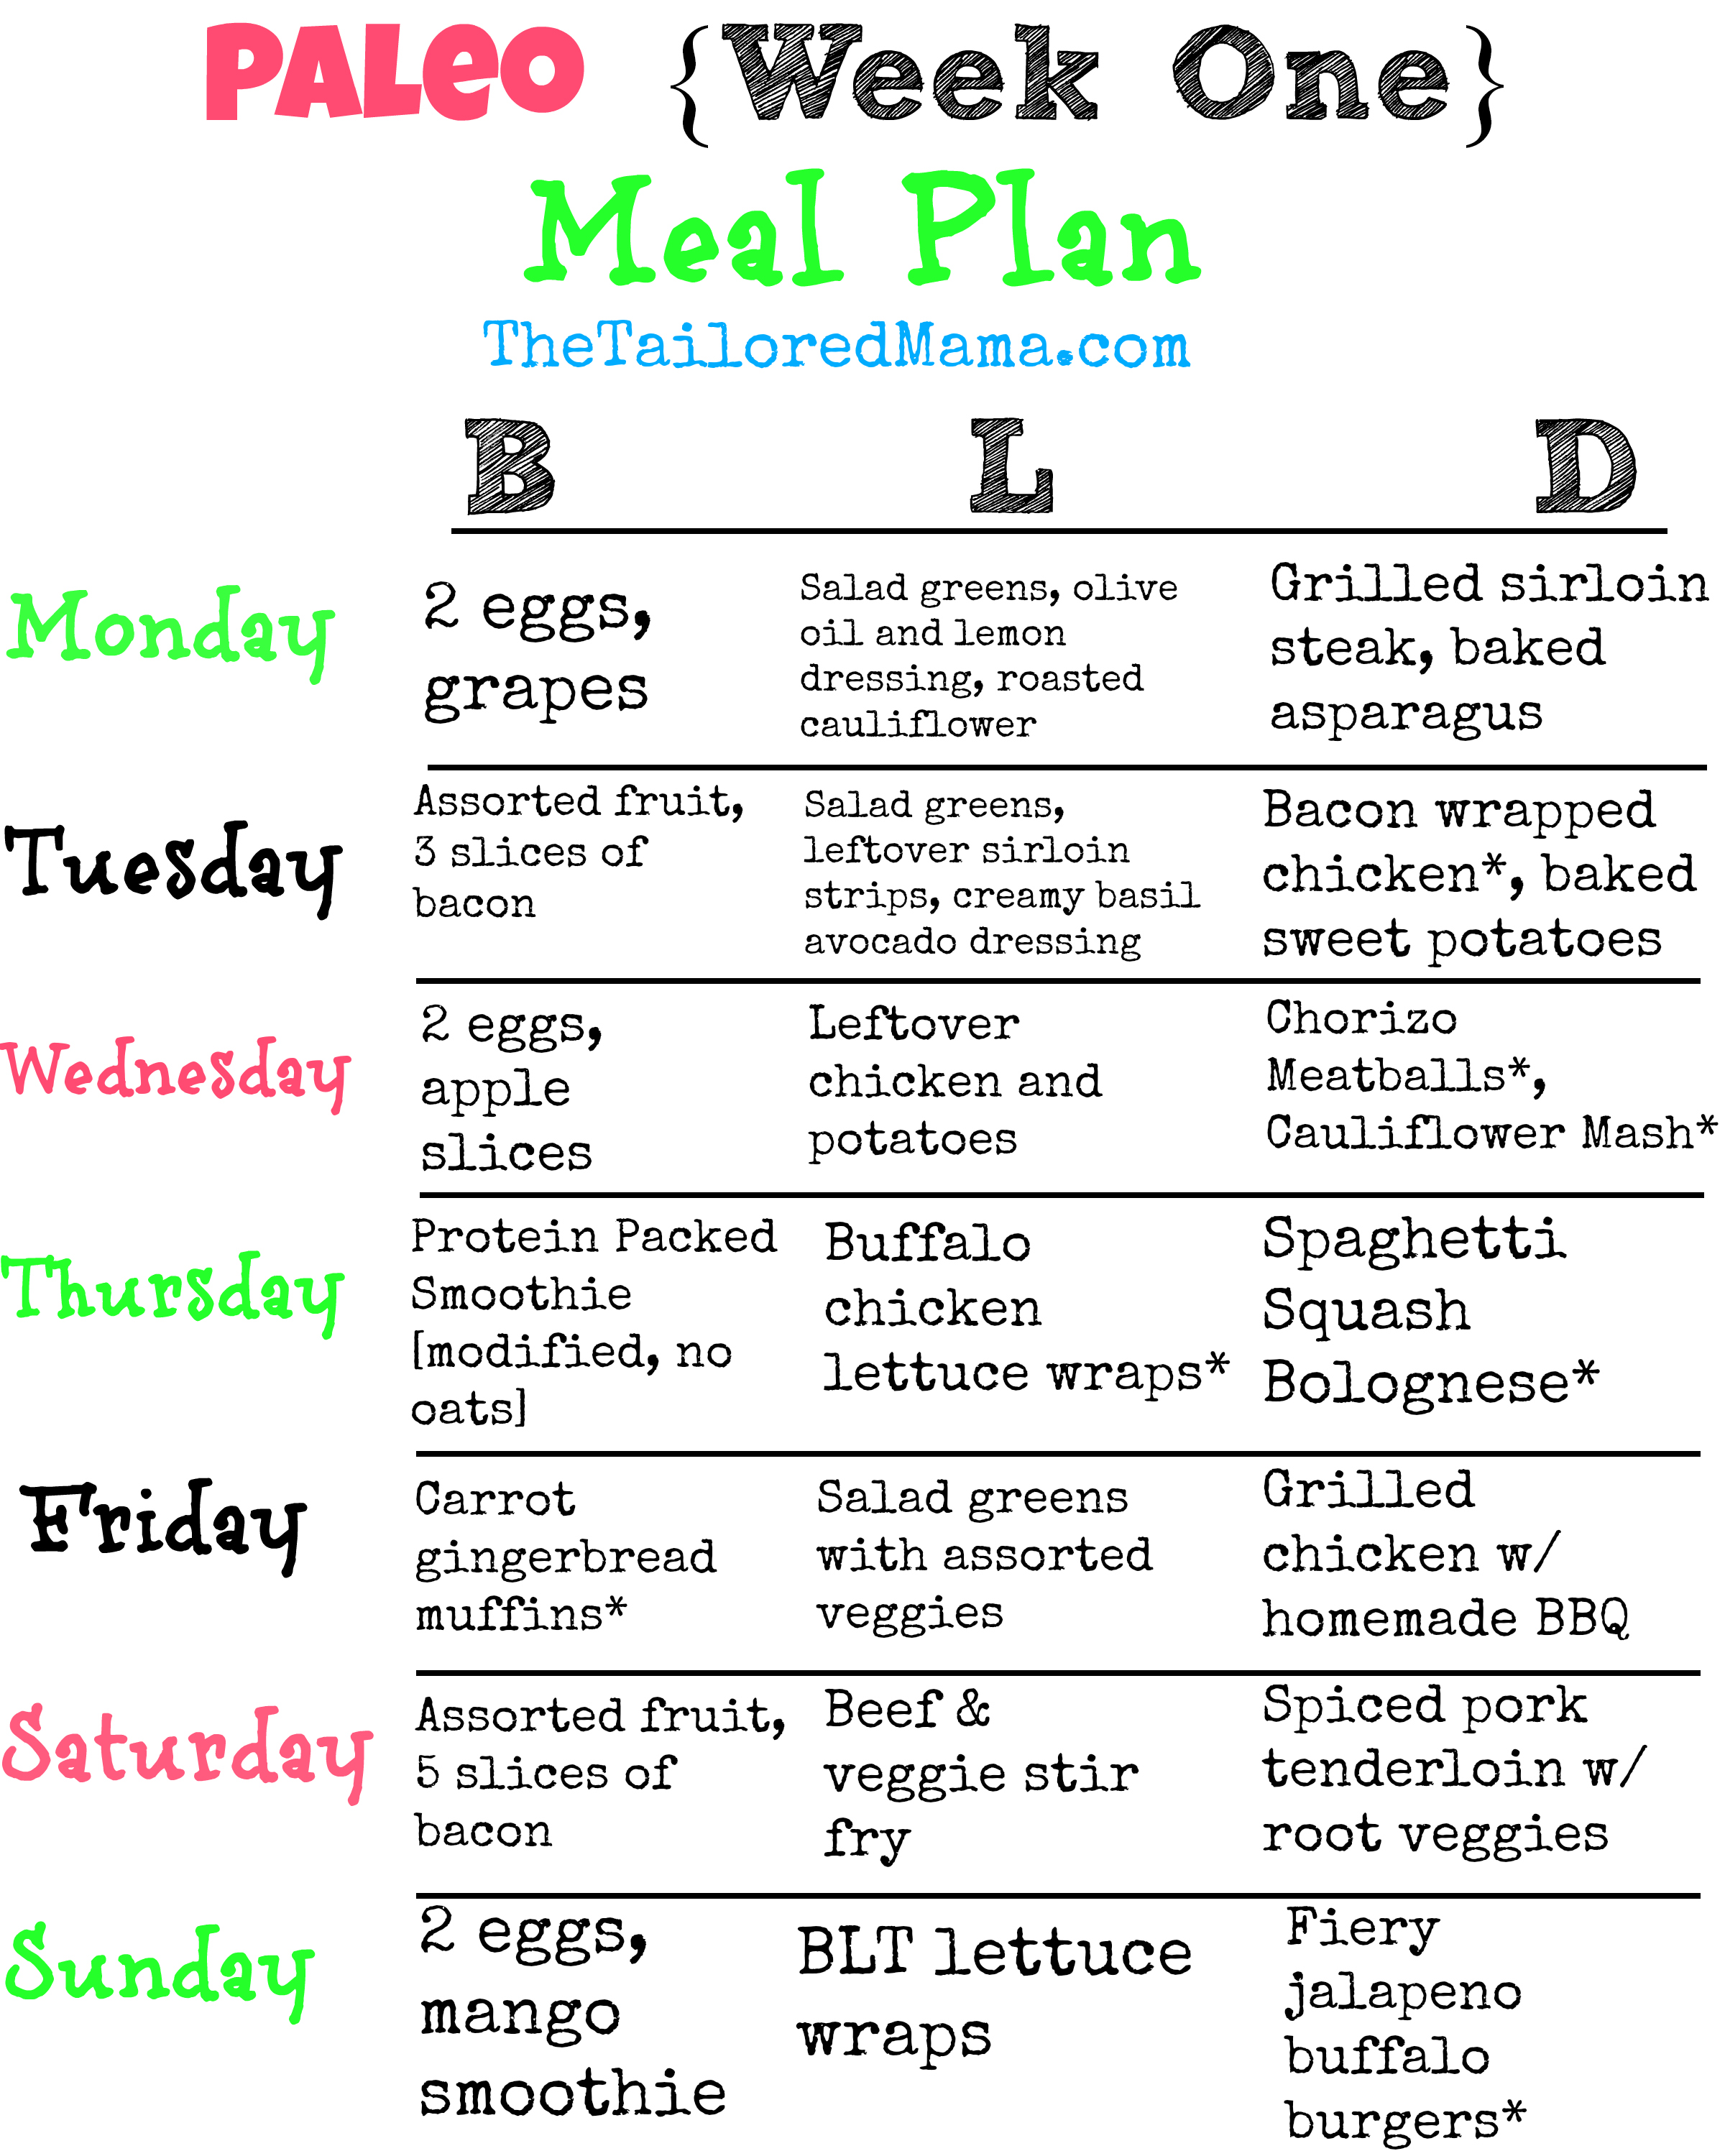 Check Out This Paleo Week One Meal Plan To Help You Jump Start Healthy The Origin Of Paleo